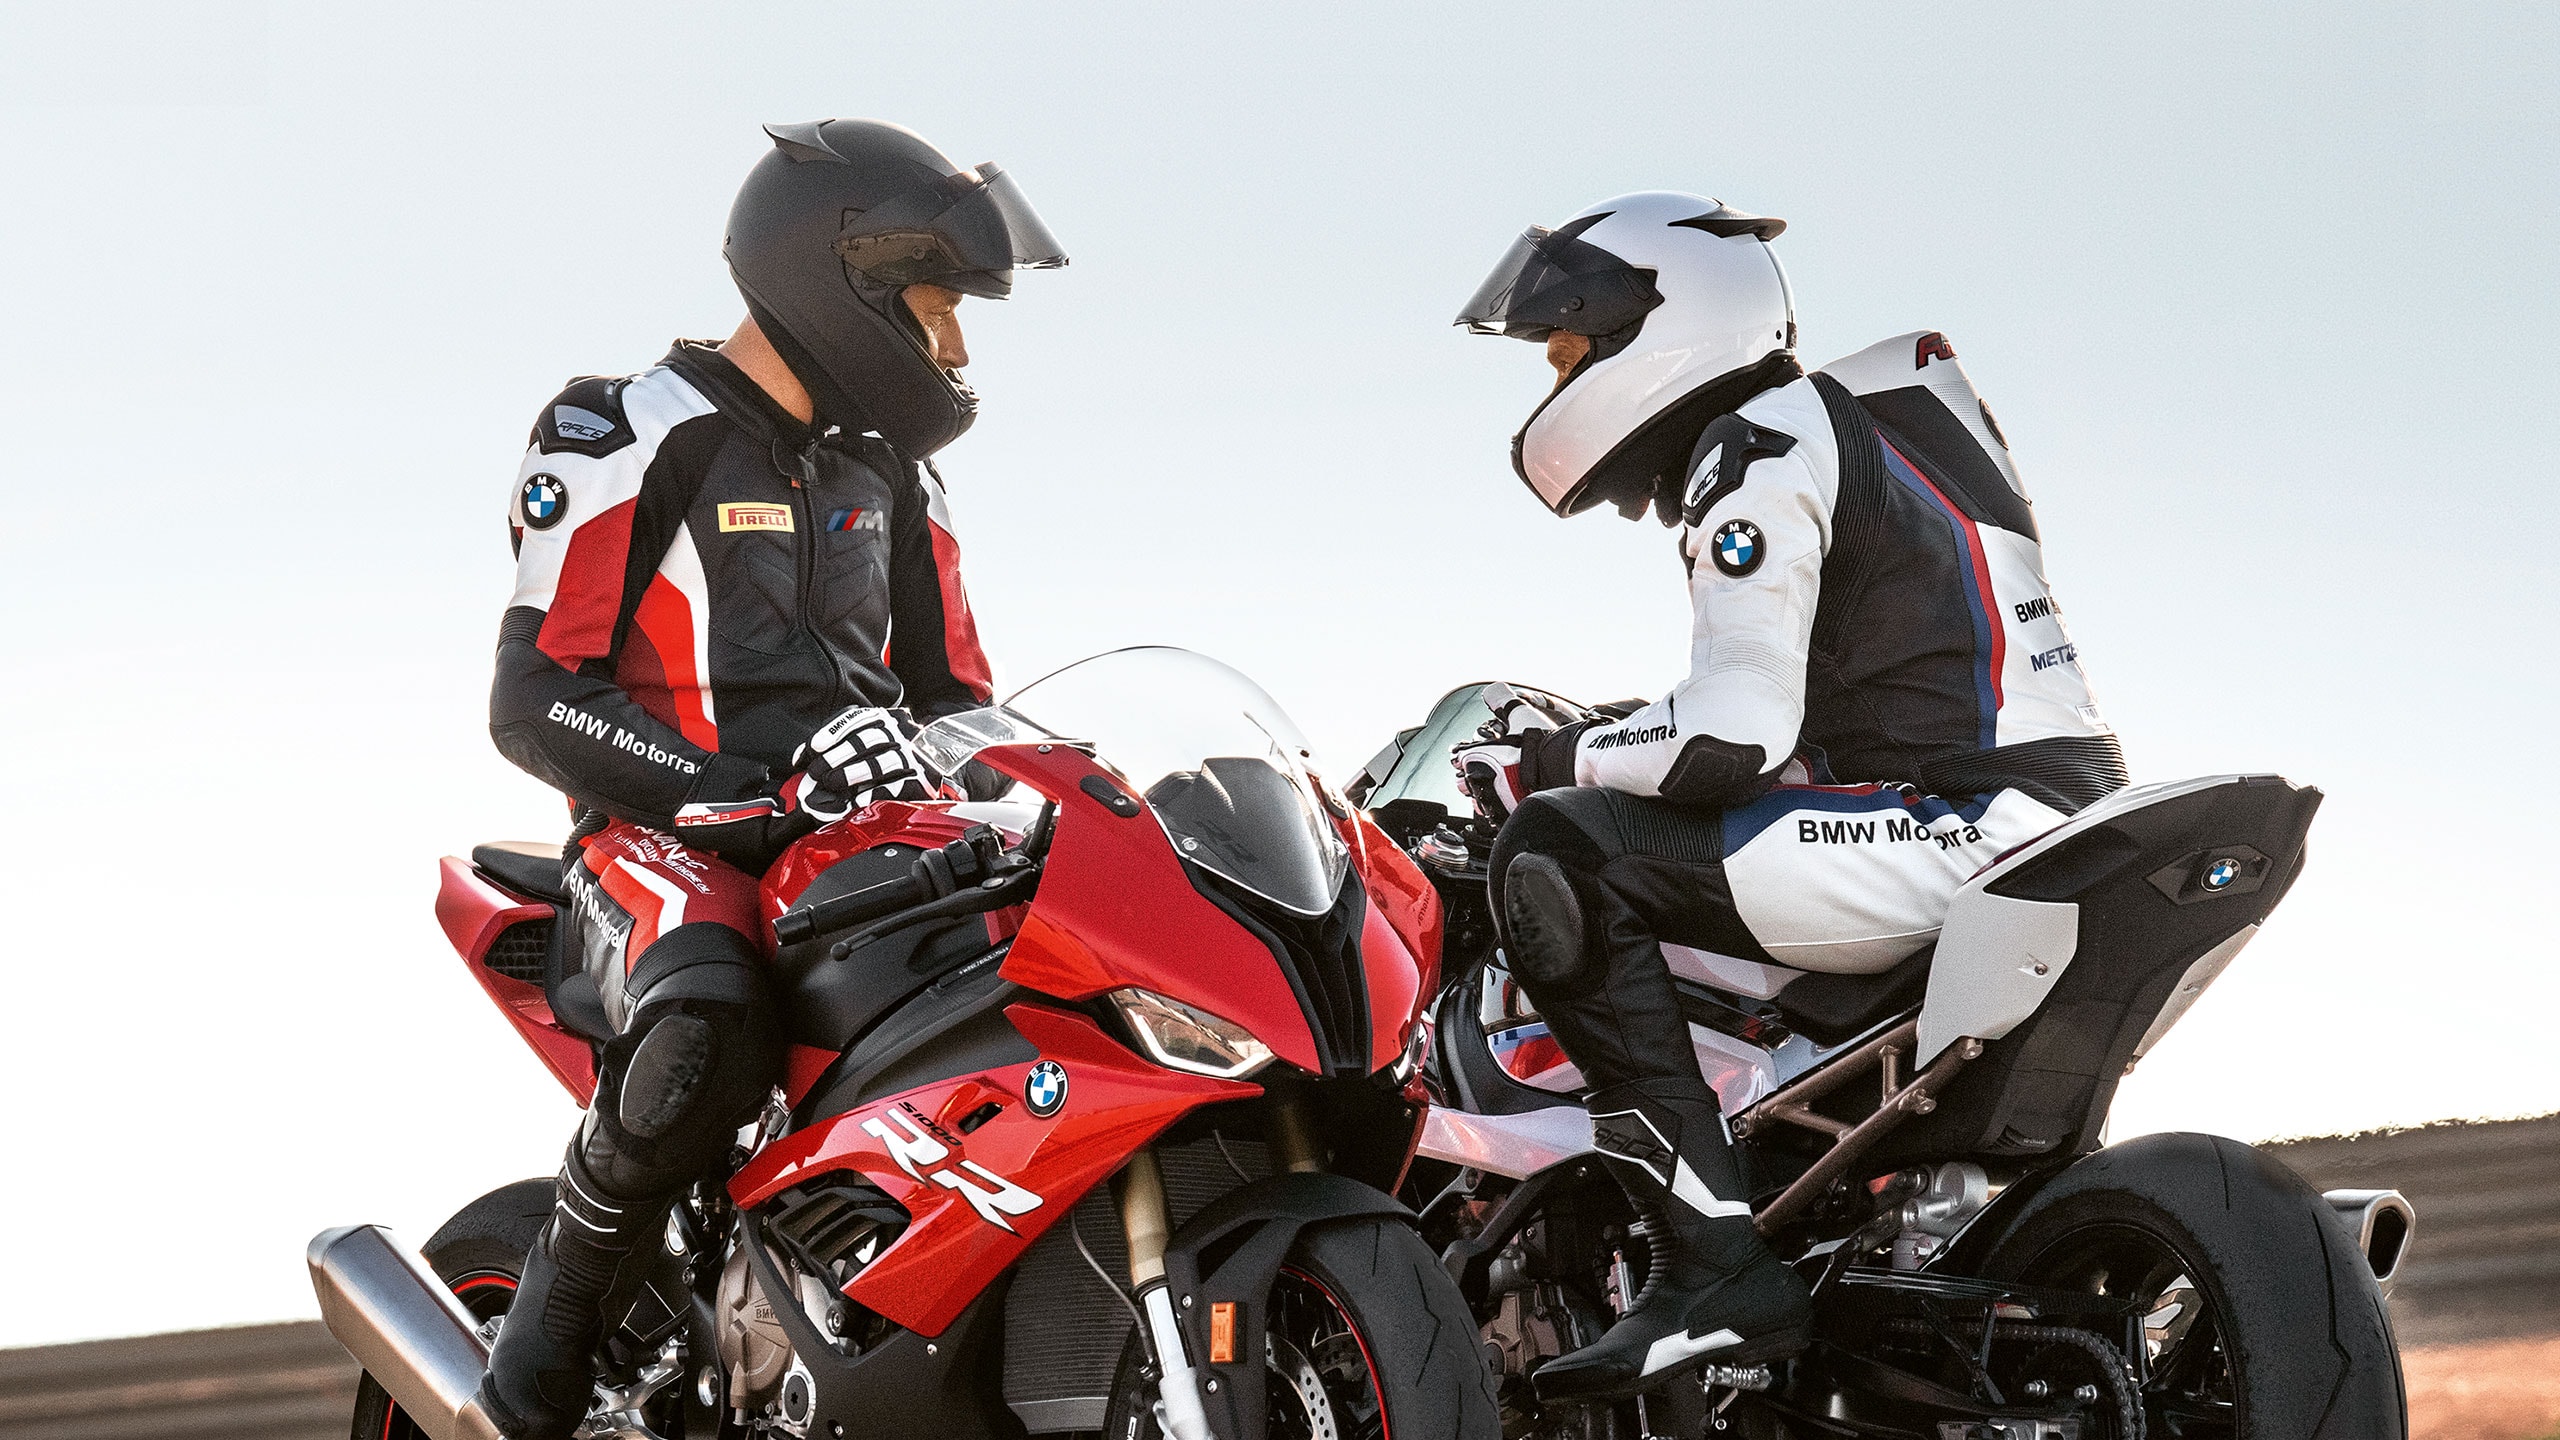 The importance of racing suit to weekend riders